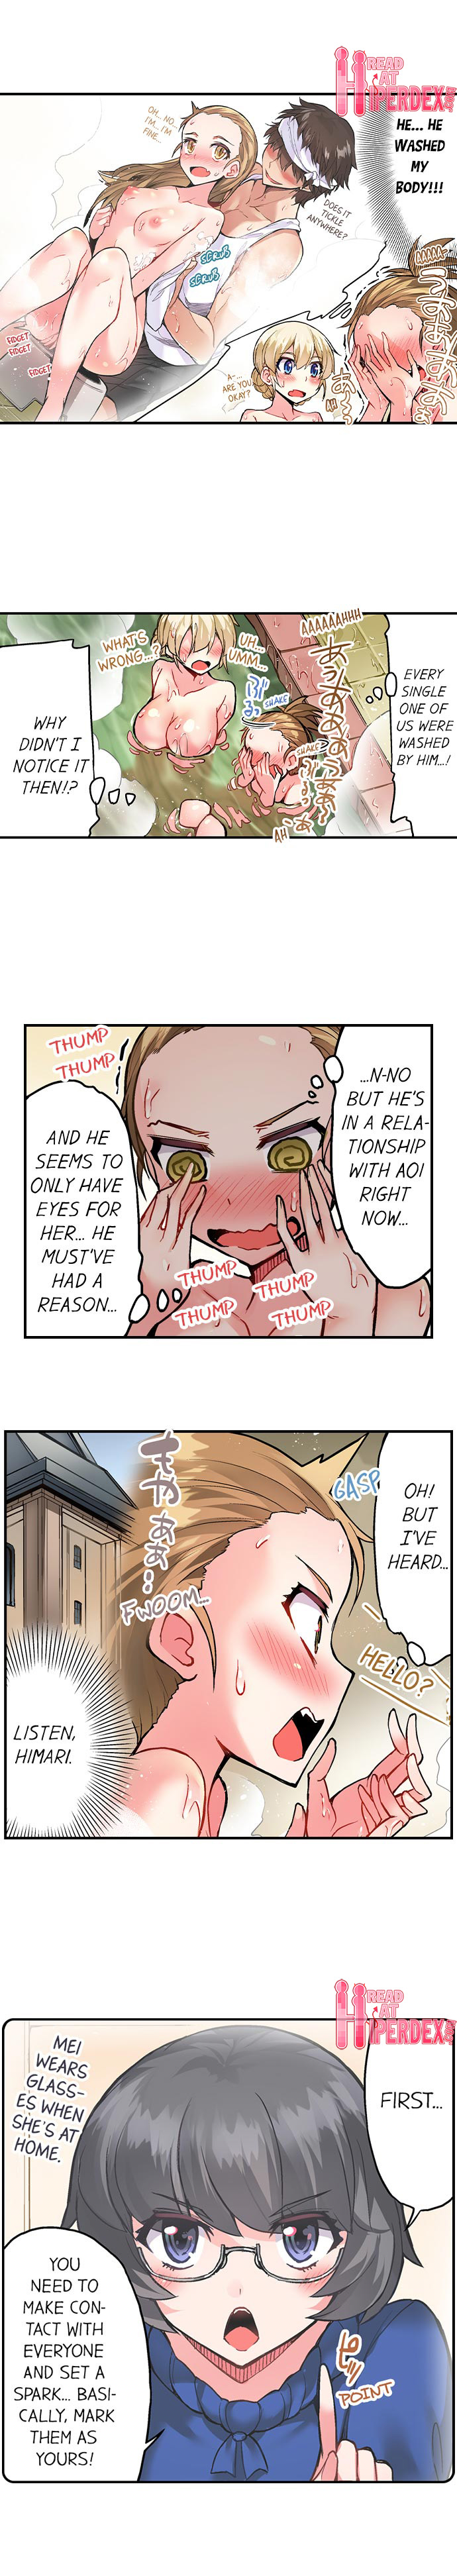 Traditional Job of Washing Girls’ Body - Chapter 100 Page 5